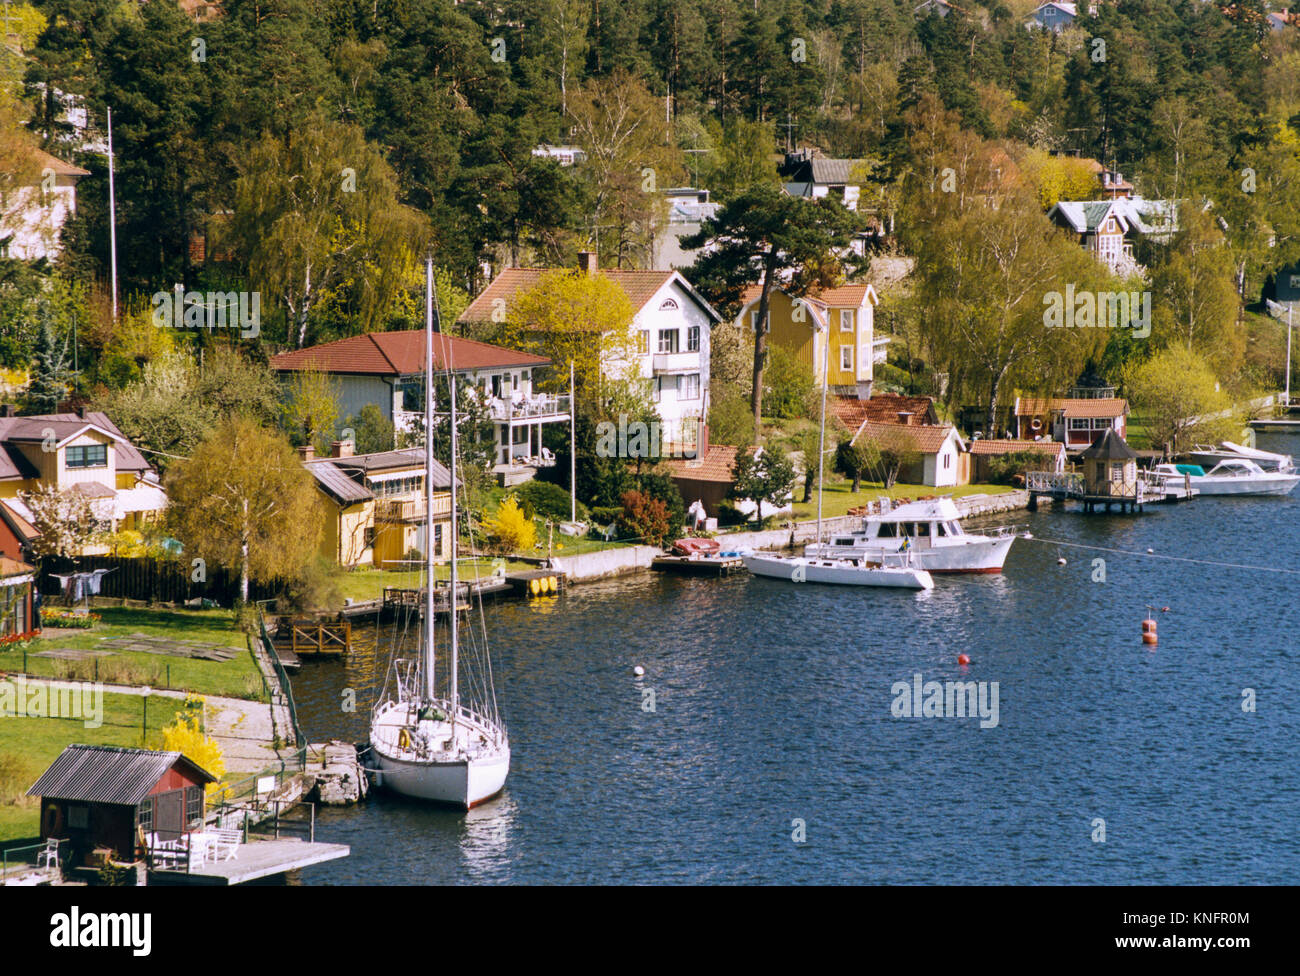 VILLAS and boats by the water in one of Stockholms suburbs 2014 Stock Photo